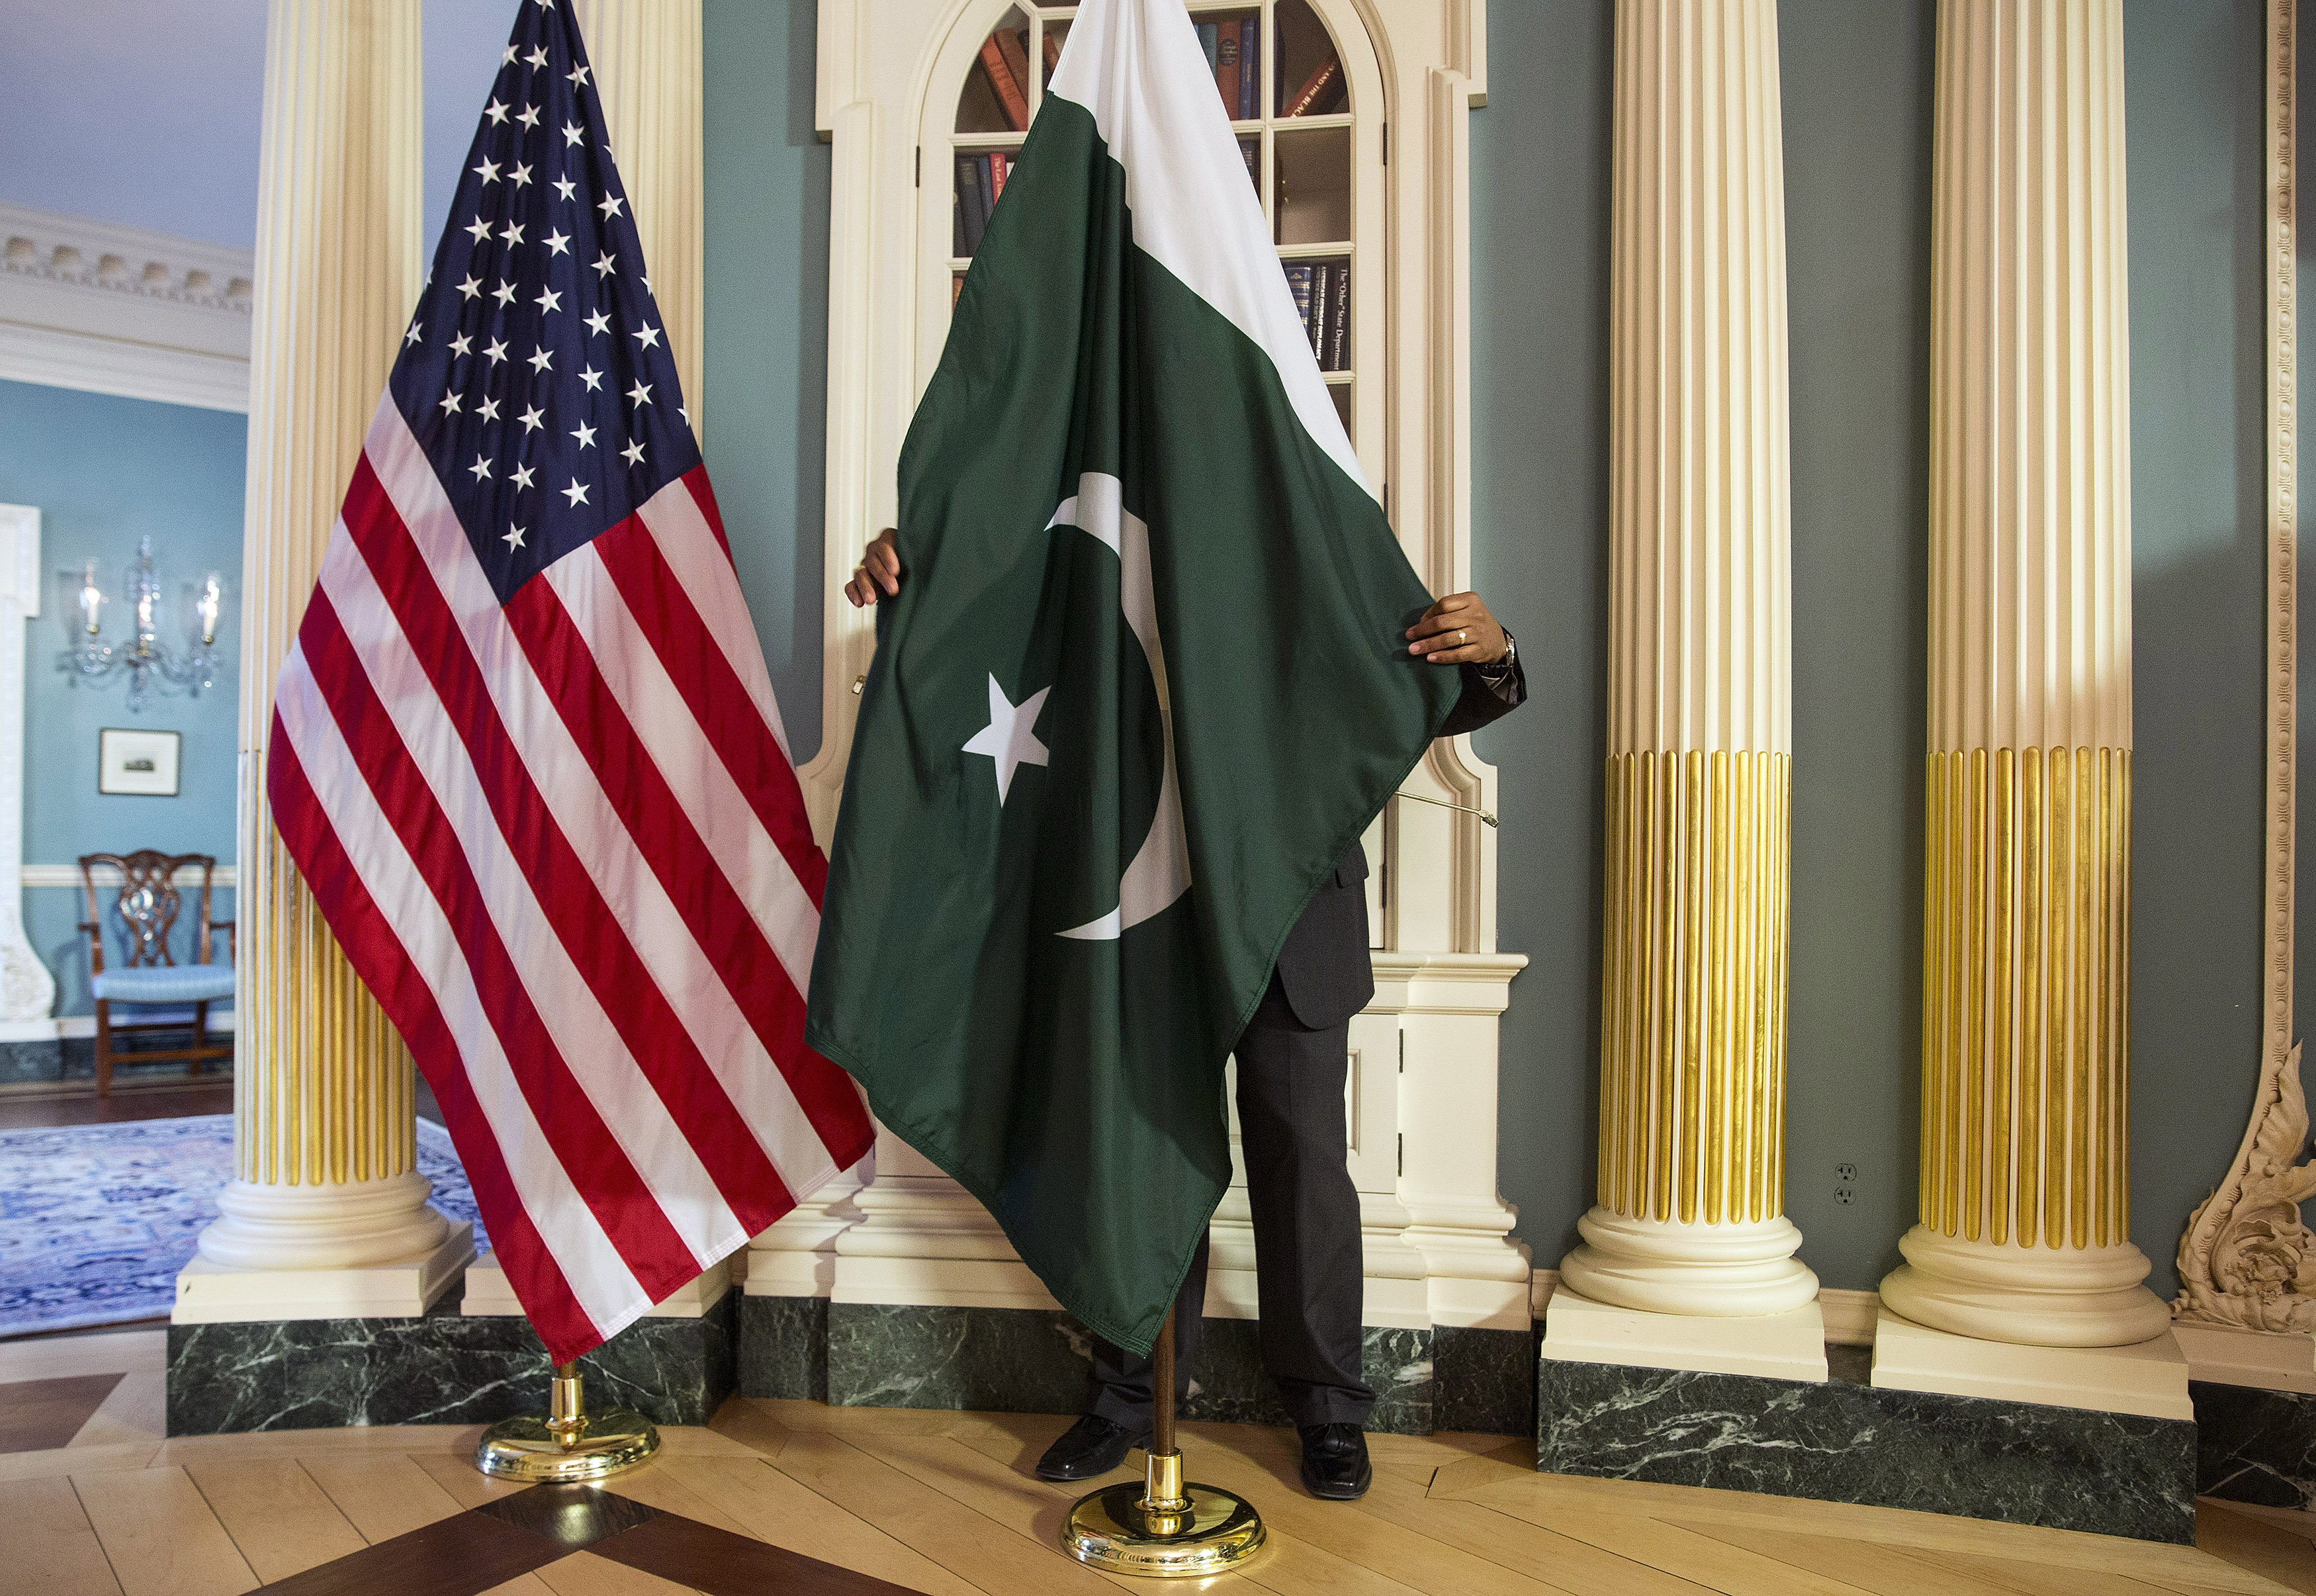 A State Department contractor adjust a flag before a meeting between U.S. Secretary of State Kerry and Pakistan's Interior Minister Khan on the sidelines of the White House Summit on Countering Violent Extremism at the State Department in Washington